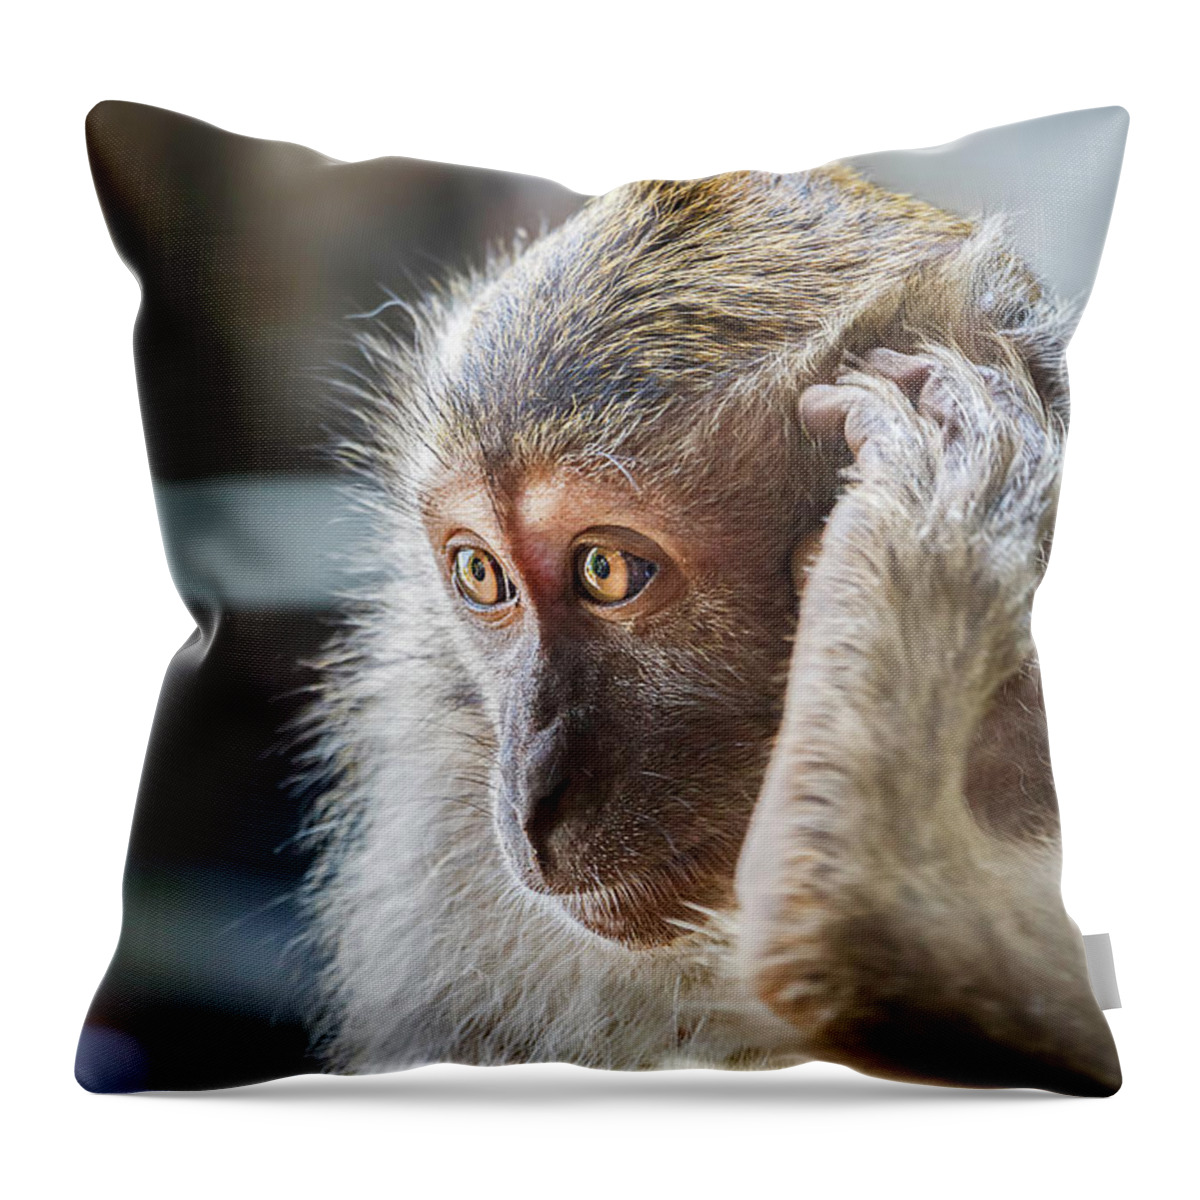 Monkey Throw Pillow featuring the photograph Hello, Monkey Here by Rick Deacon